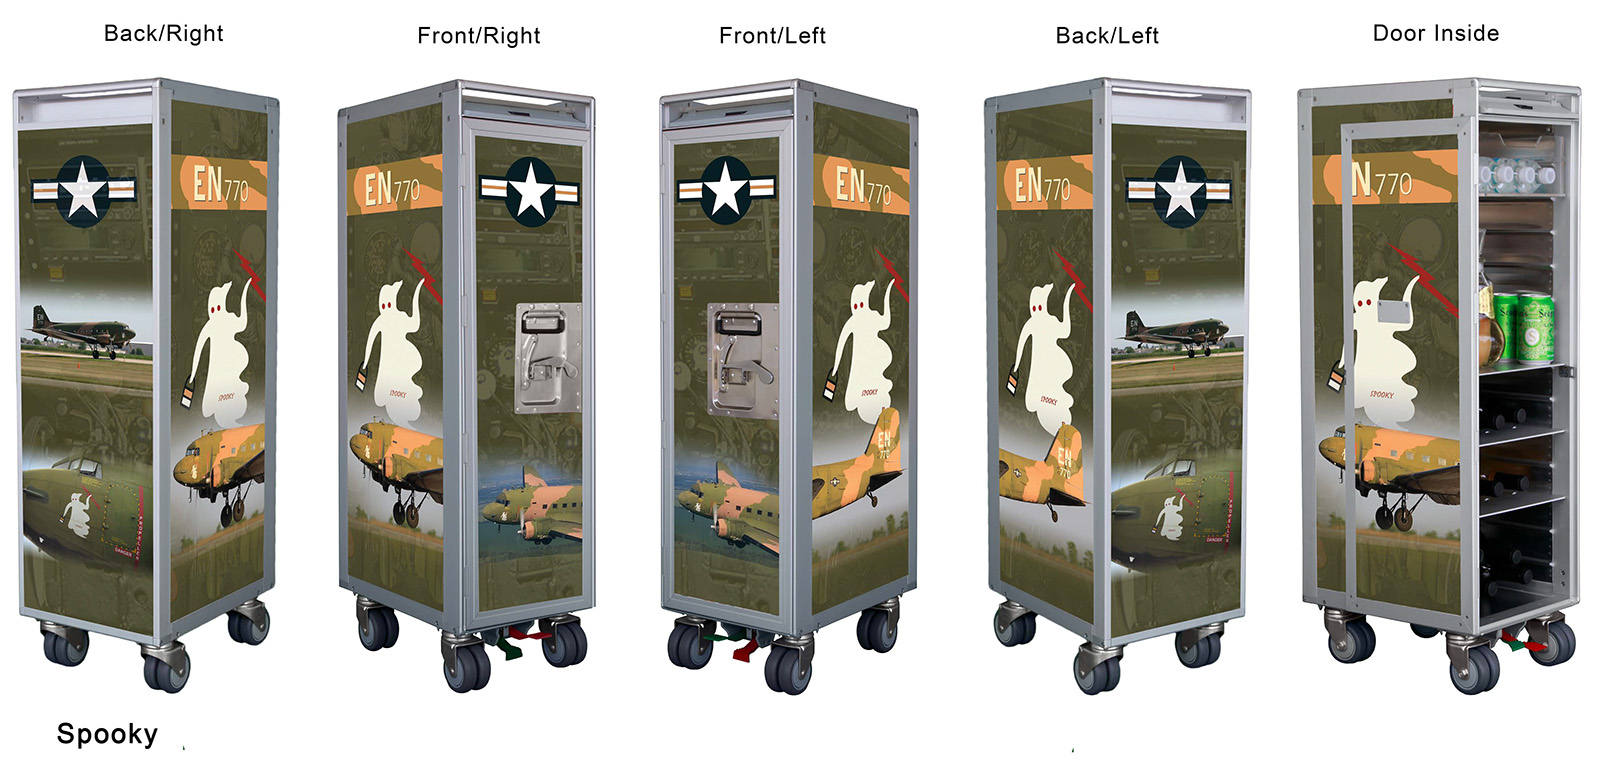 MySkyCart.com has a new, warbird-themed galley cart. This one will help raise money for the American Flight Museum's AC-47 'Spooky'. MySkyCart.com is also willing to consider designing custom carts for other museums which may be interested in helping raise money for their aircraft. Give 'em a call!